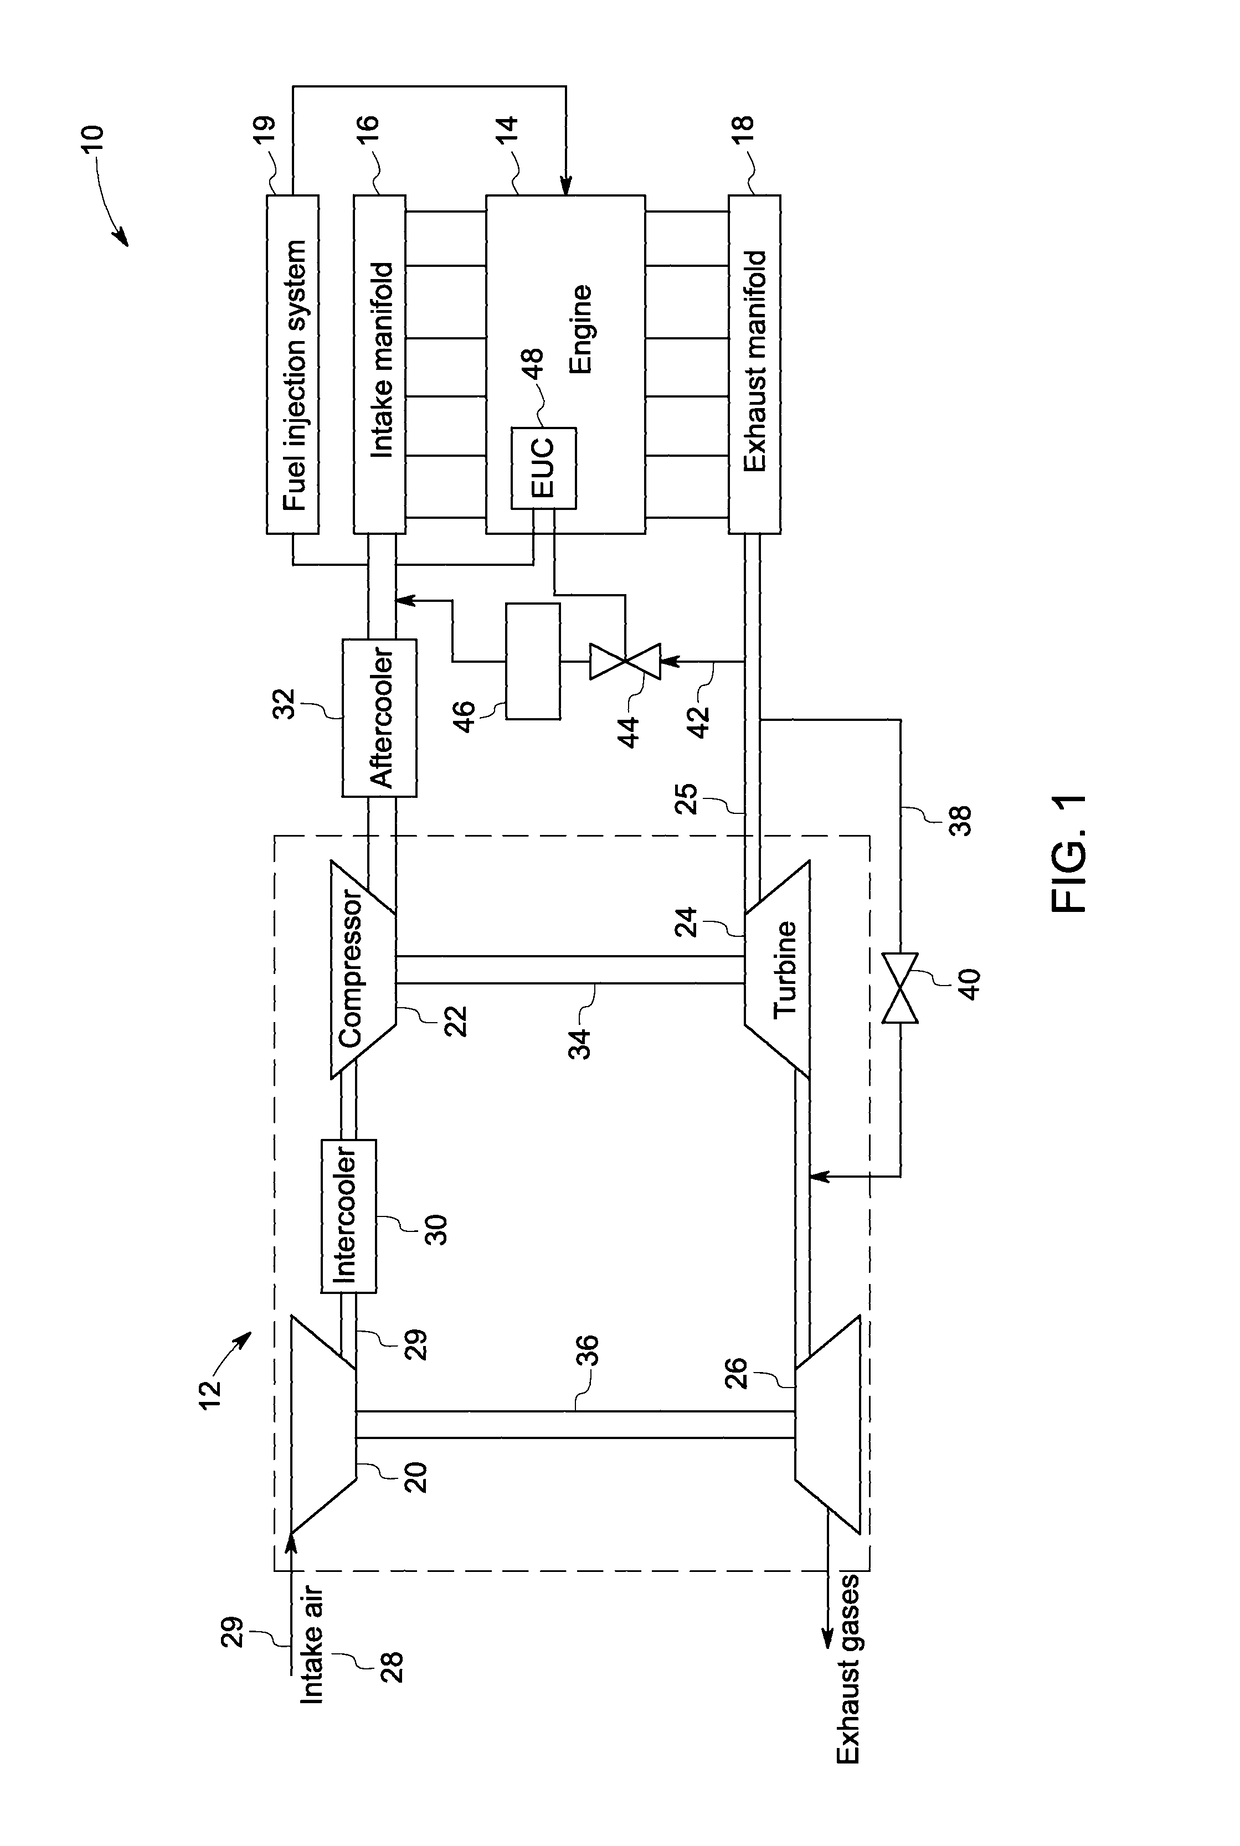 System and method of operating an internal combustion engine